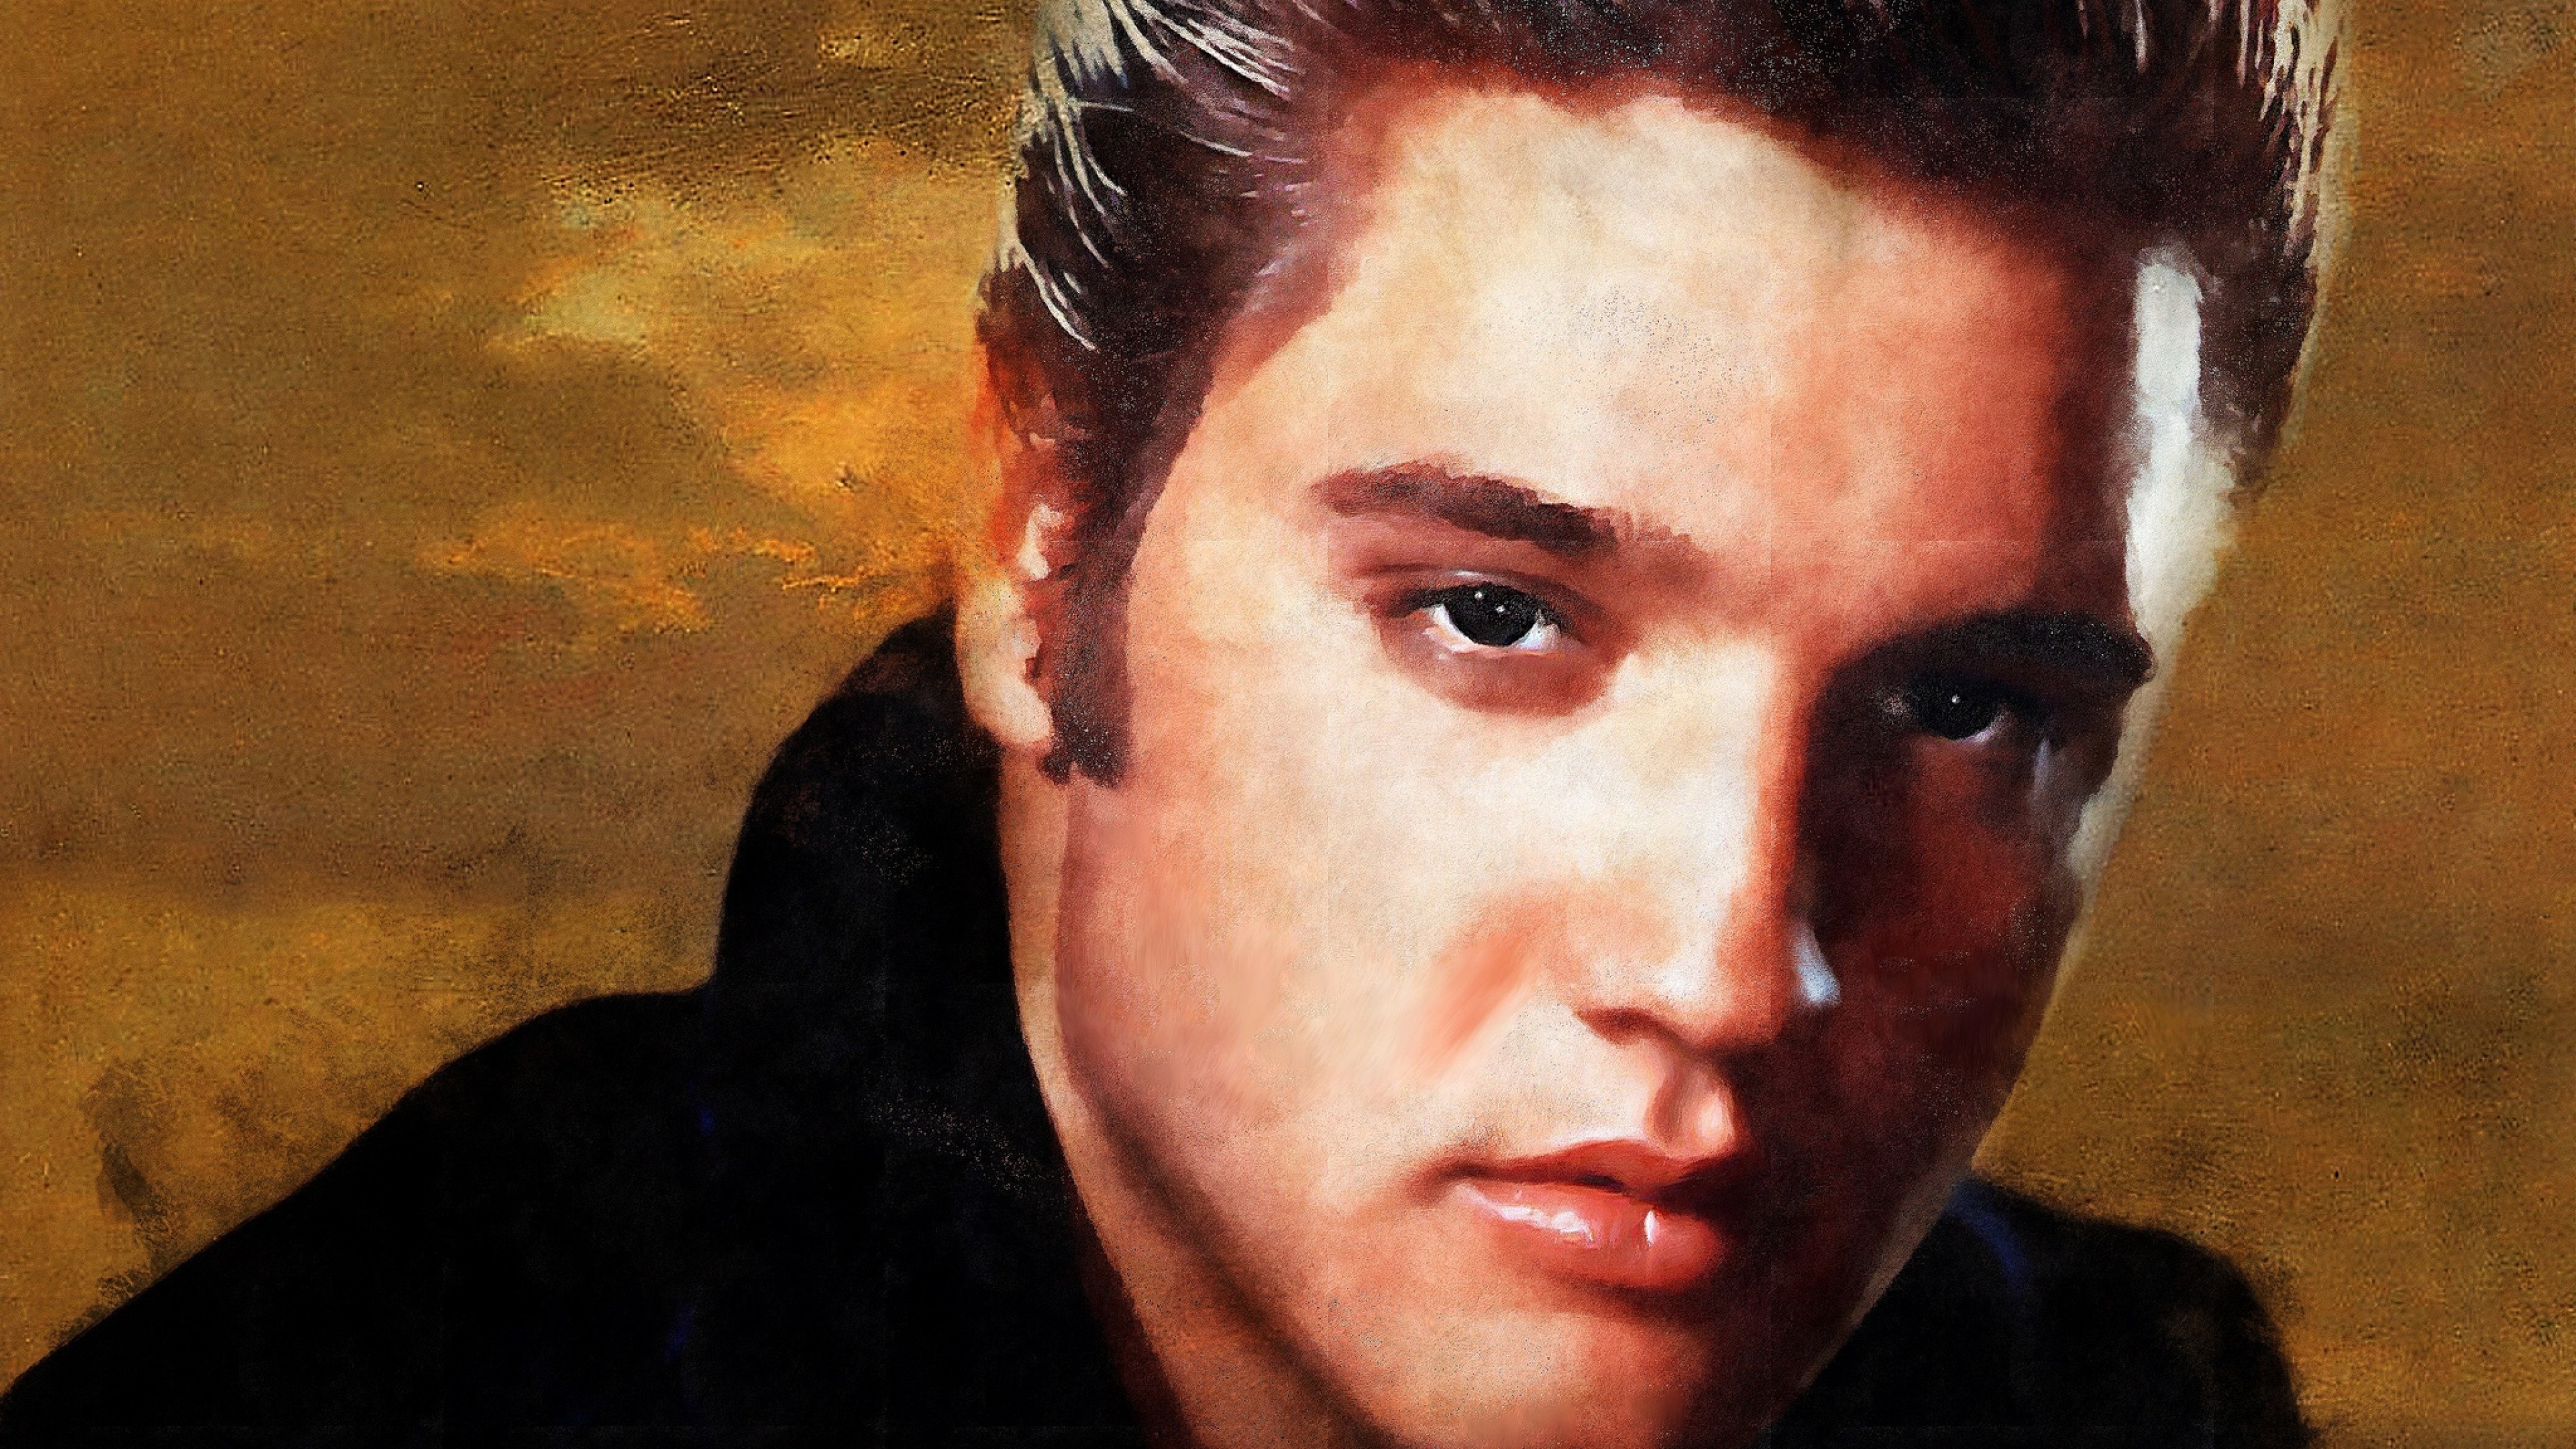 Elvis Presley: One of the most significant cultural figures of the 20th century, Love Me Tender. 3840x2160 4K Background.